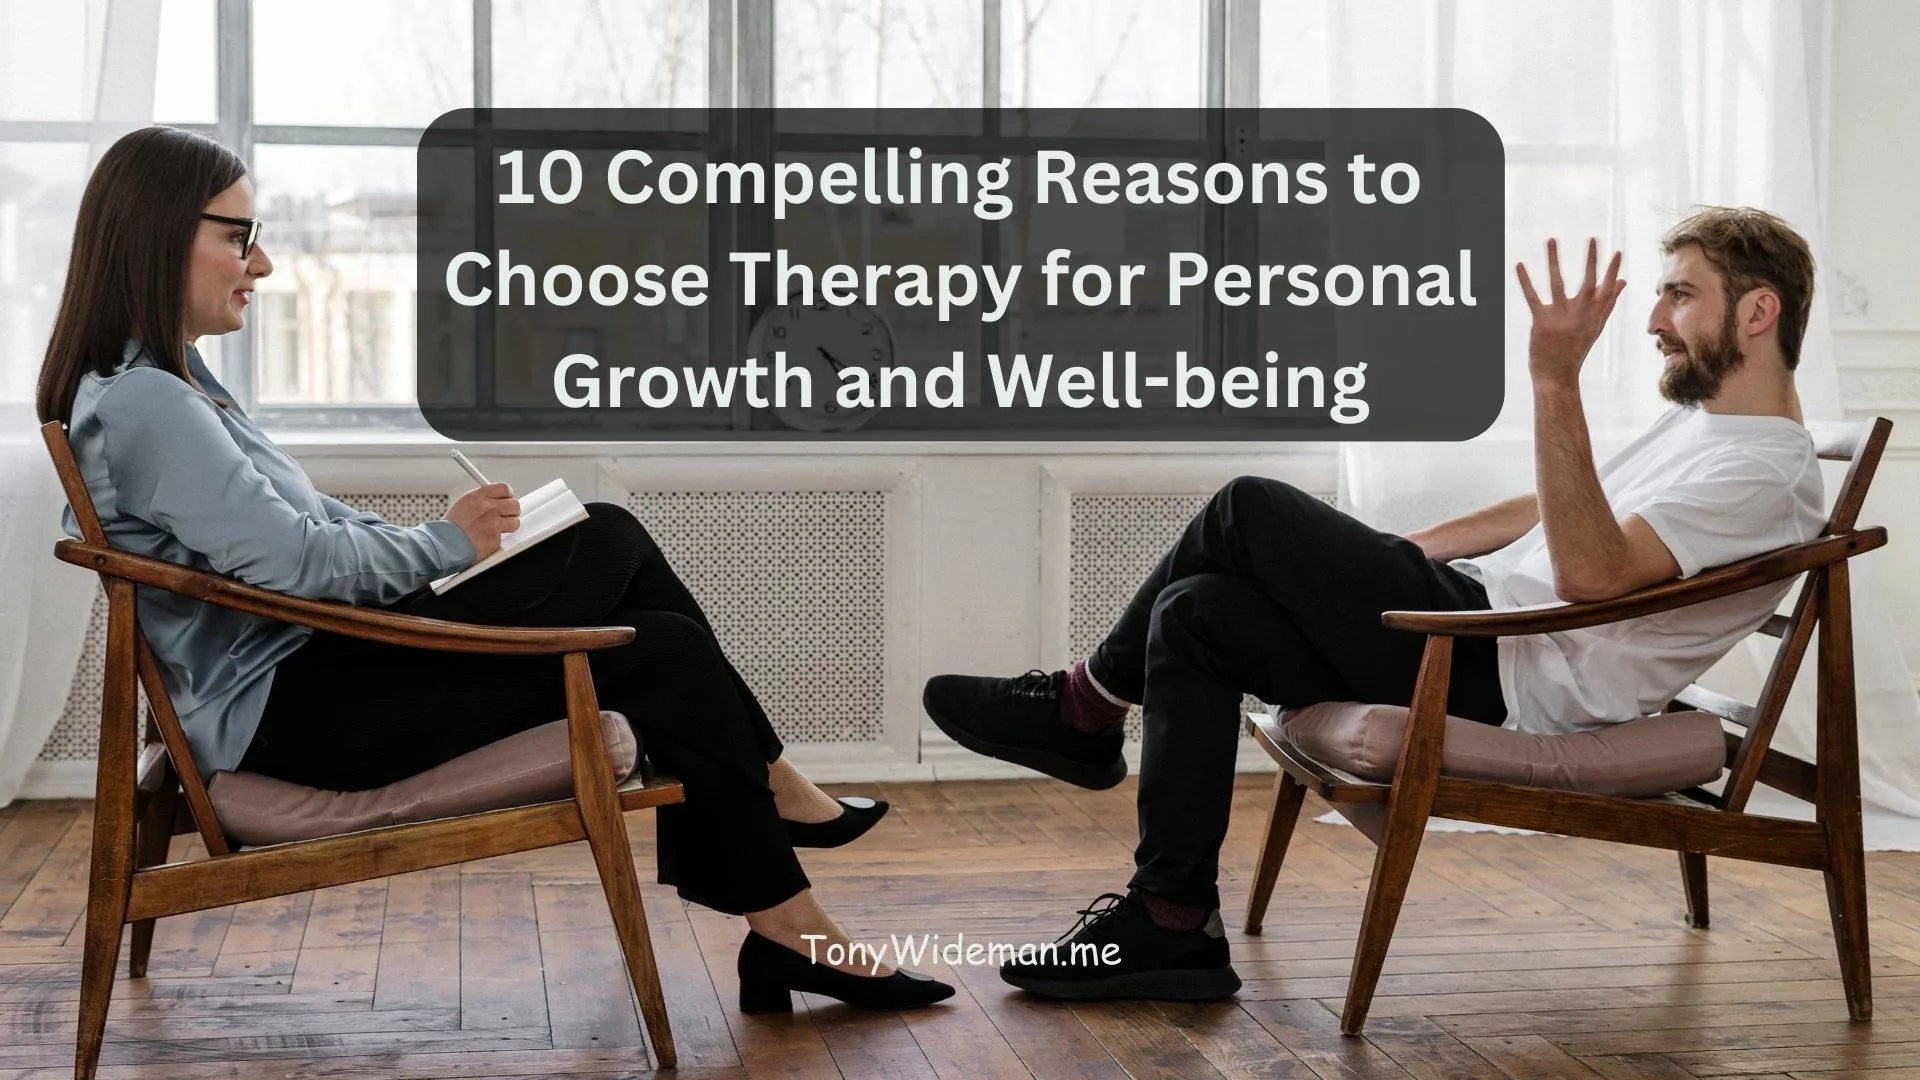 10 Compelling Reasons to Choose Therapy for Personal Growth and Well-being